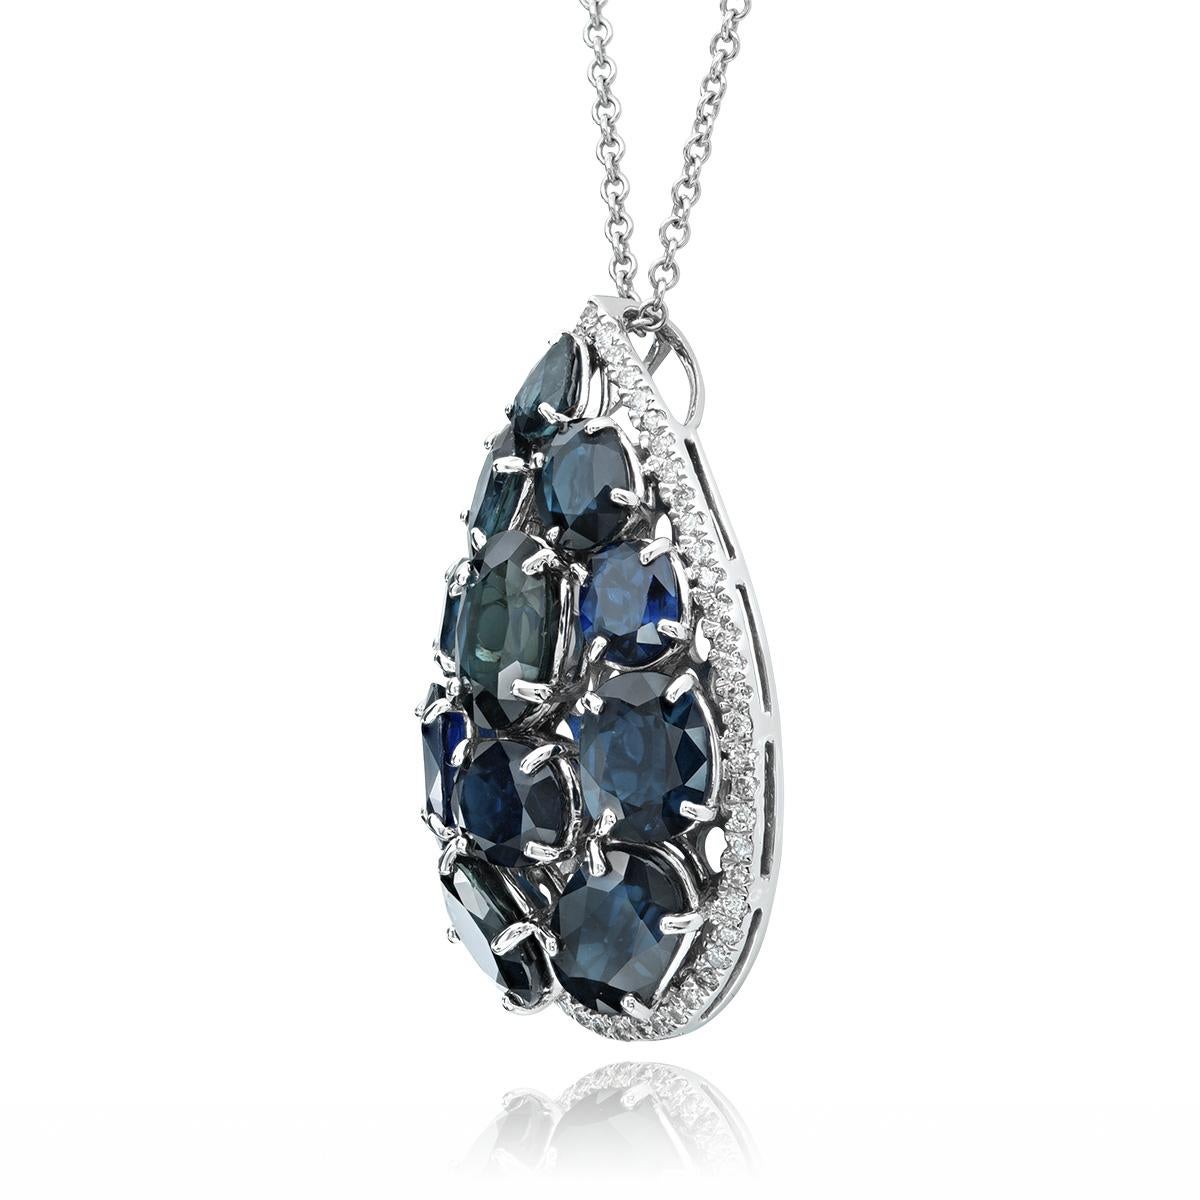 Discover the enchanting world of our Natural Blue Sapphires Pendant. Fashioned in luxurious 18K White Gold, this masterpiece unveils a stunning 16.50 carats sapphires, accompanied by 0.50 carats of dazzling diamonds. The Thai mixed cut adds depth to